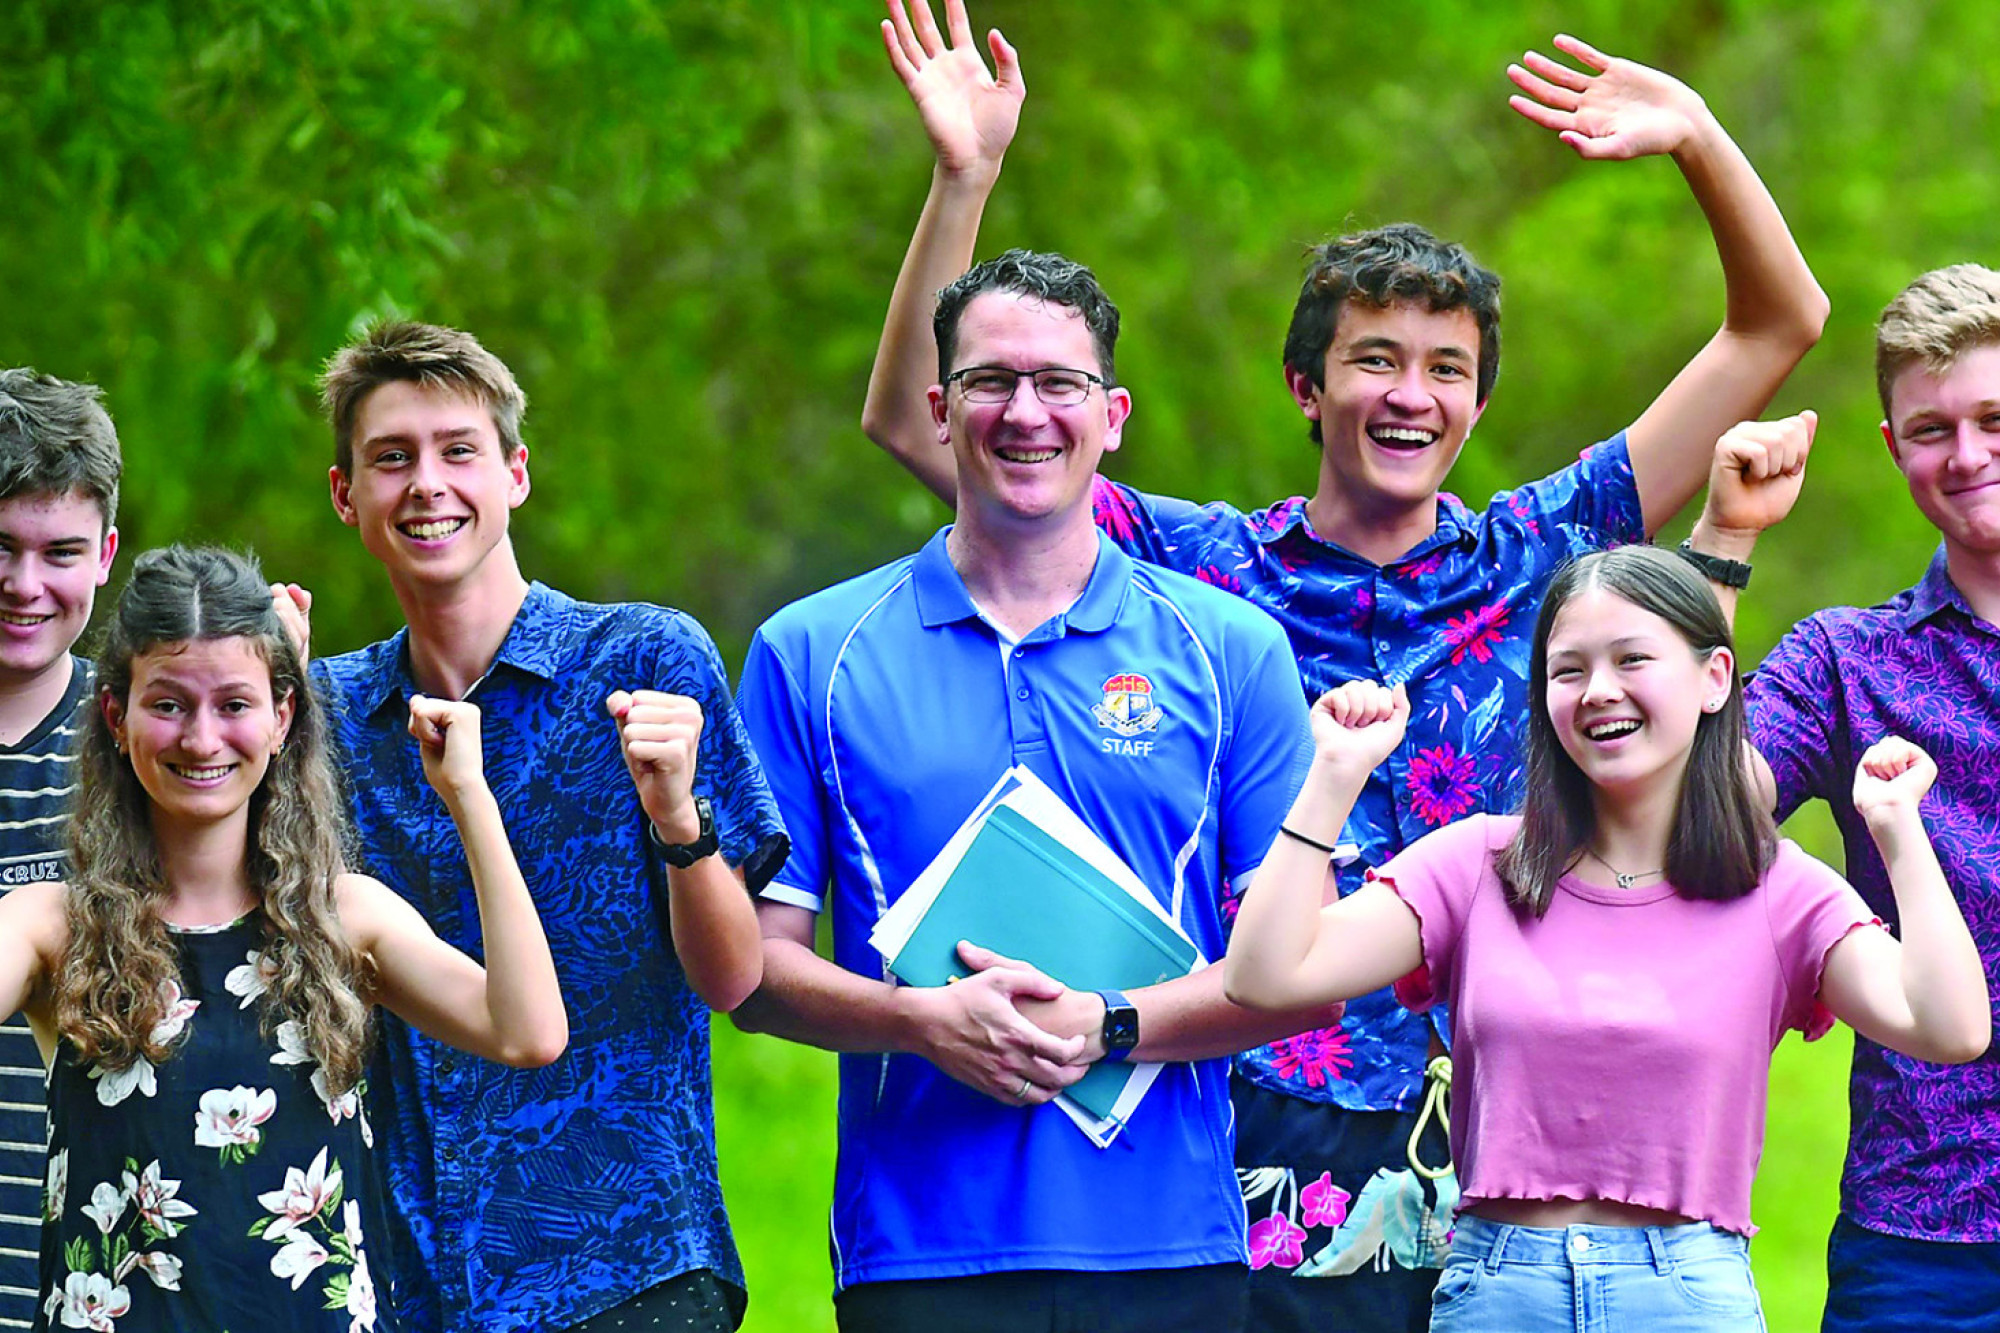 Malanda High School’s 2020 Graduates (from L - R) Bailey Wakeford, Tahlia Clennar, Lari Wilkinson, Riley Jones, Mia Grace and Rohan Hickey with Deputy Principal Ben Harding (centre) excited to receive the Top 6 ATAR scores in their grade.